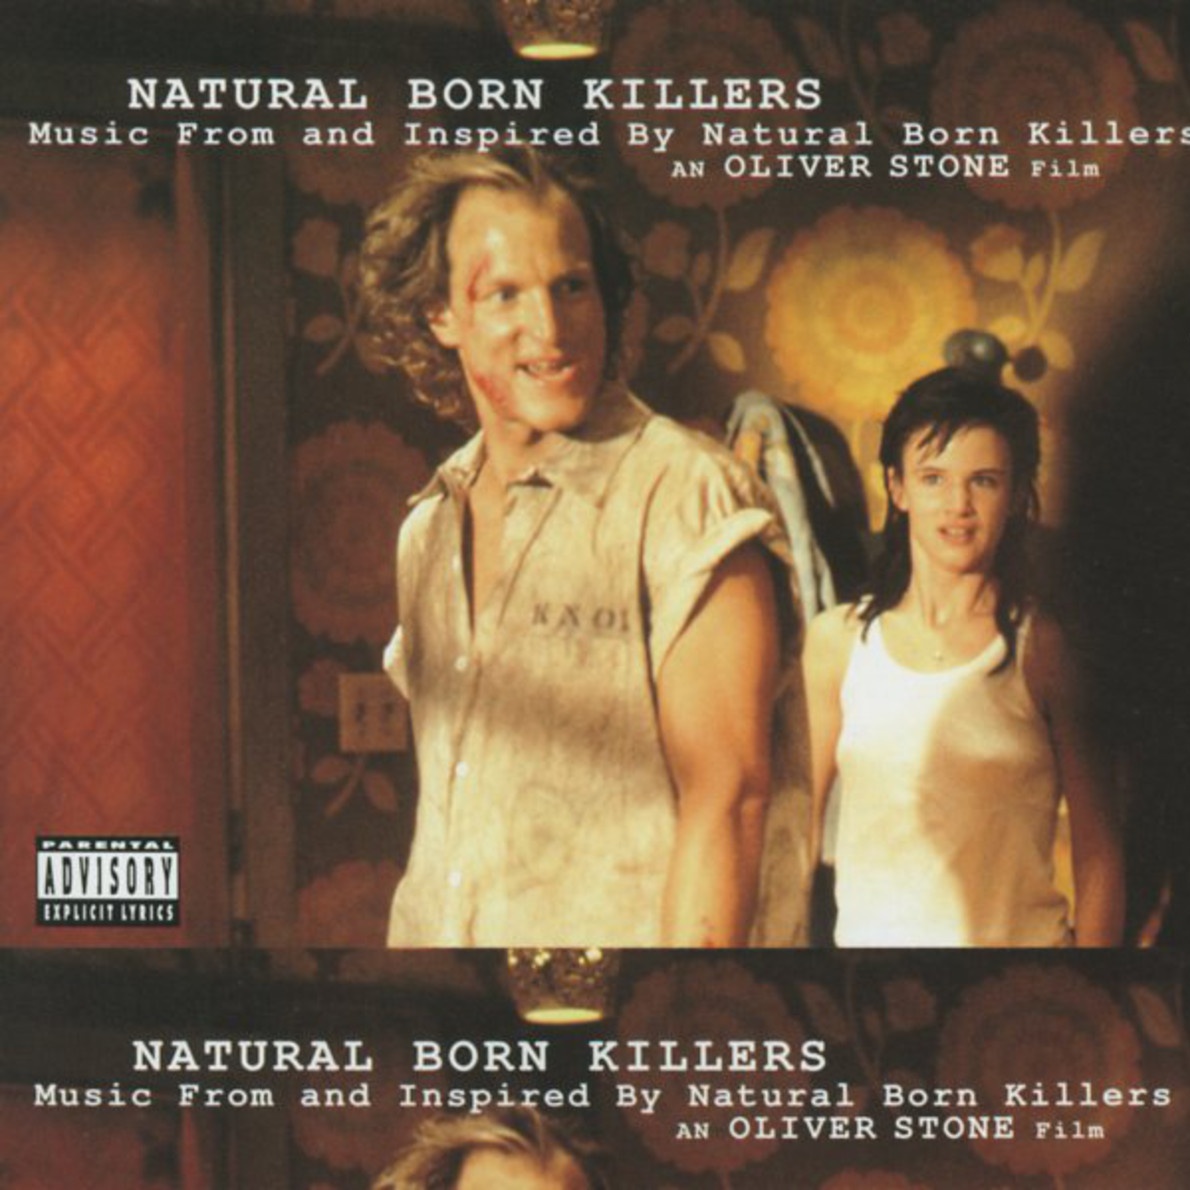 Totally Hot - From "Natural Born Killers" Soundtrack